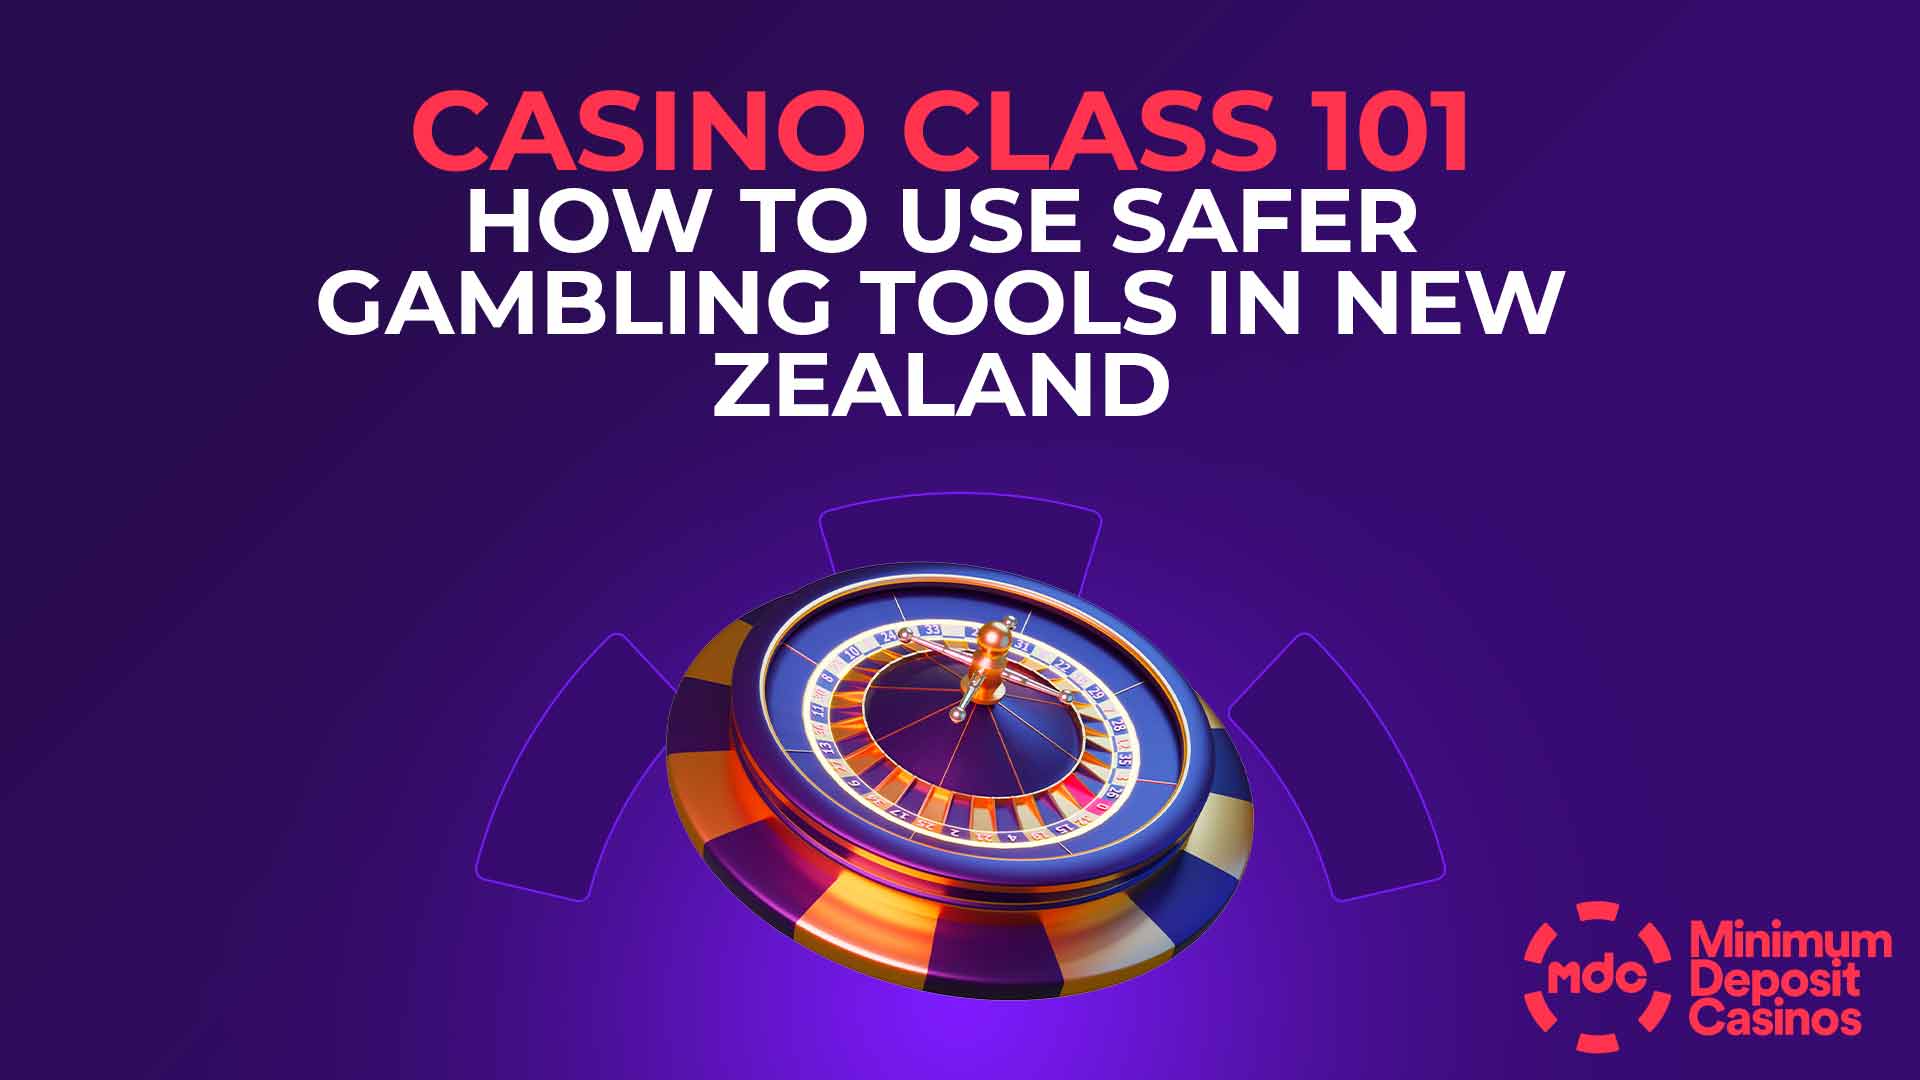 Casino Class 101: How to Use Safer Gambling Tools in New Zealand